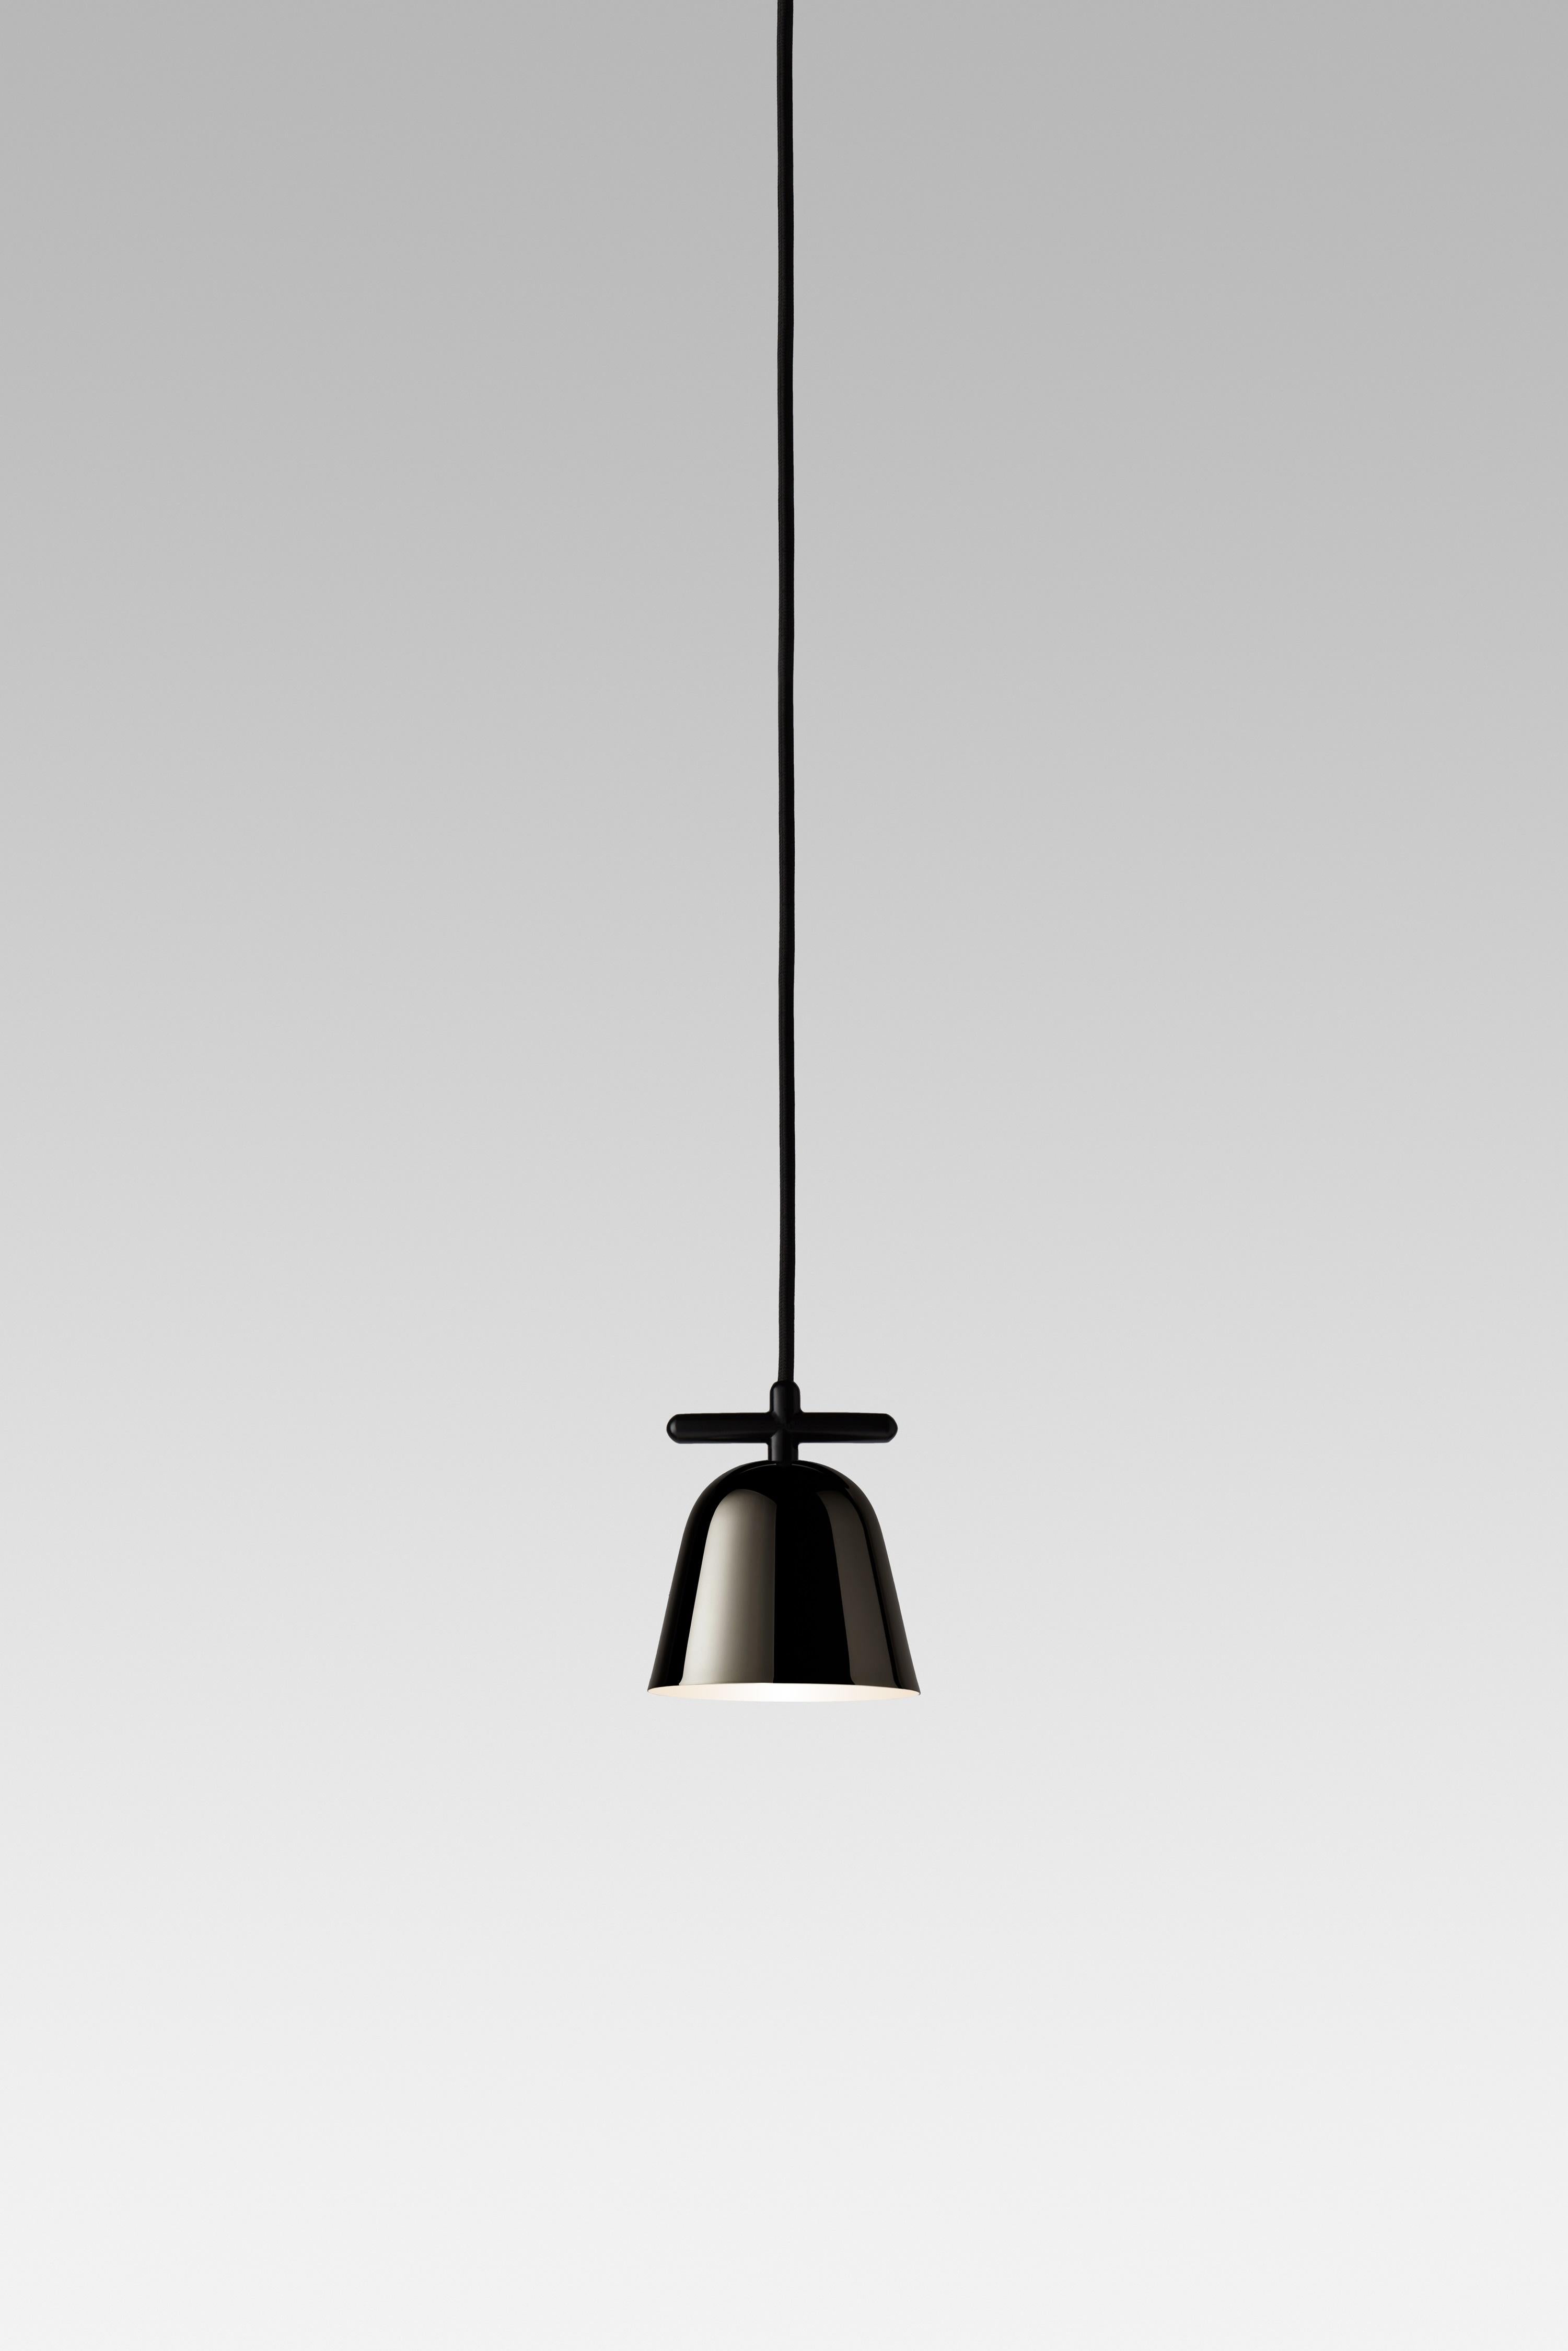 Lighto T PE by Jaime Hayon

This is a skinny yet characteristic collection. So simple yet so unique, with stunning finishes.

Suspension lamp. Structure in black matt lacquered steel. Dome in golden glossy or black chrome electroplated. Cob led unit